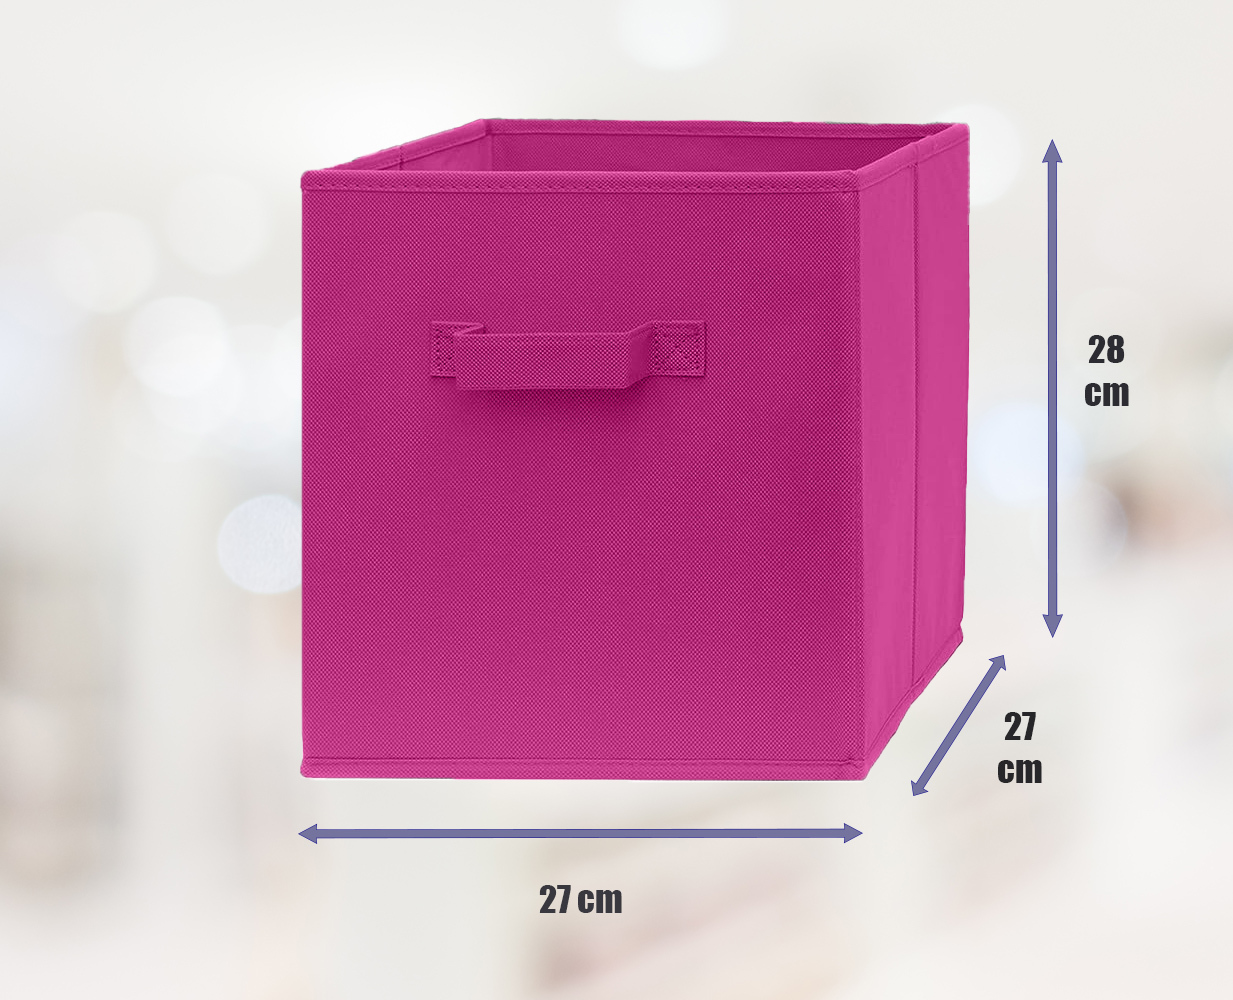 Foldable Folding Storage Cube, Cube Bookcase With Storage Bins And Lids